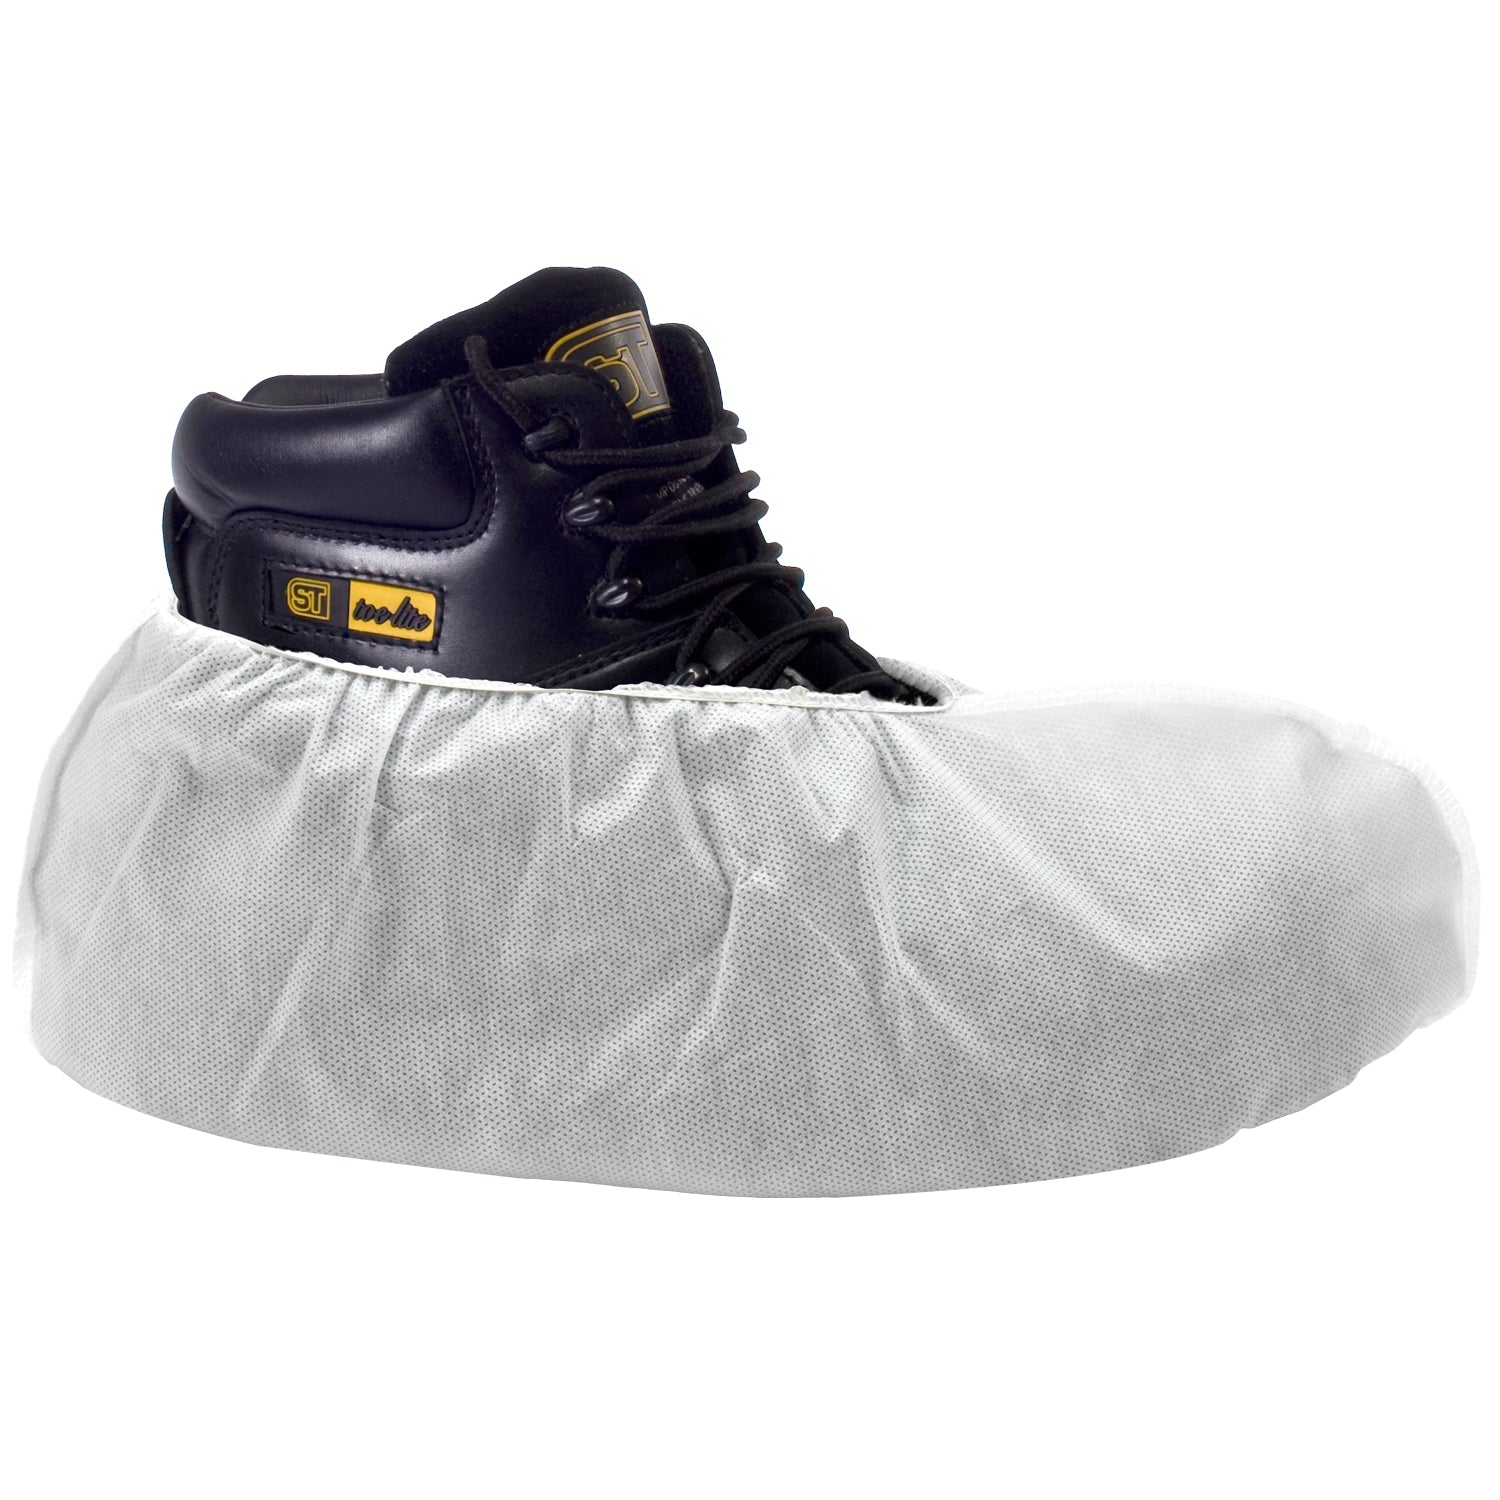 Supertouch SMS Shoe Covers